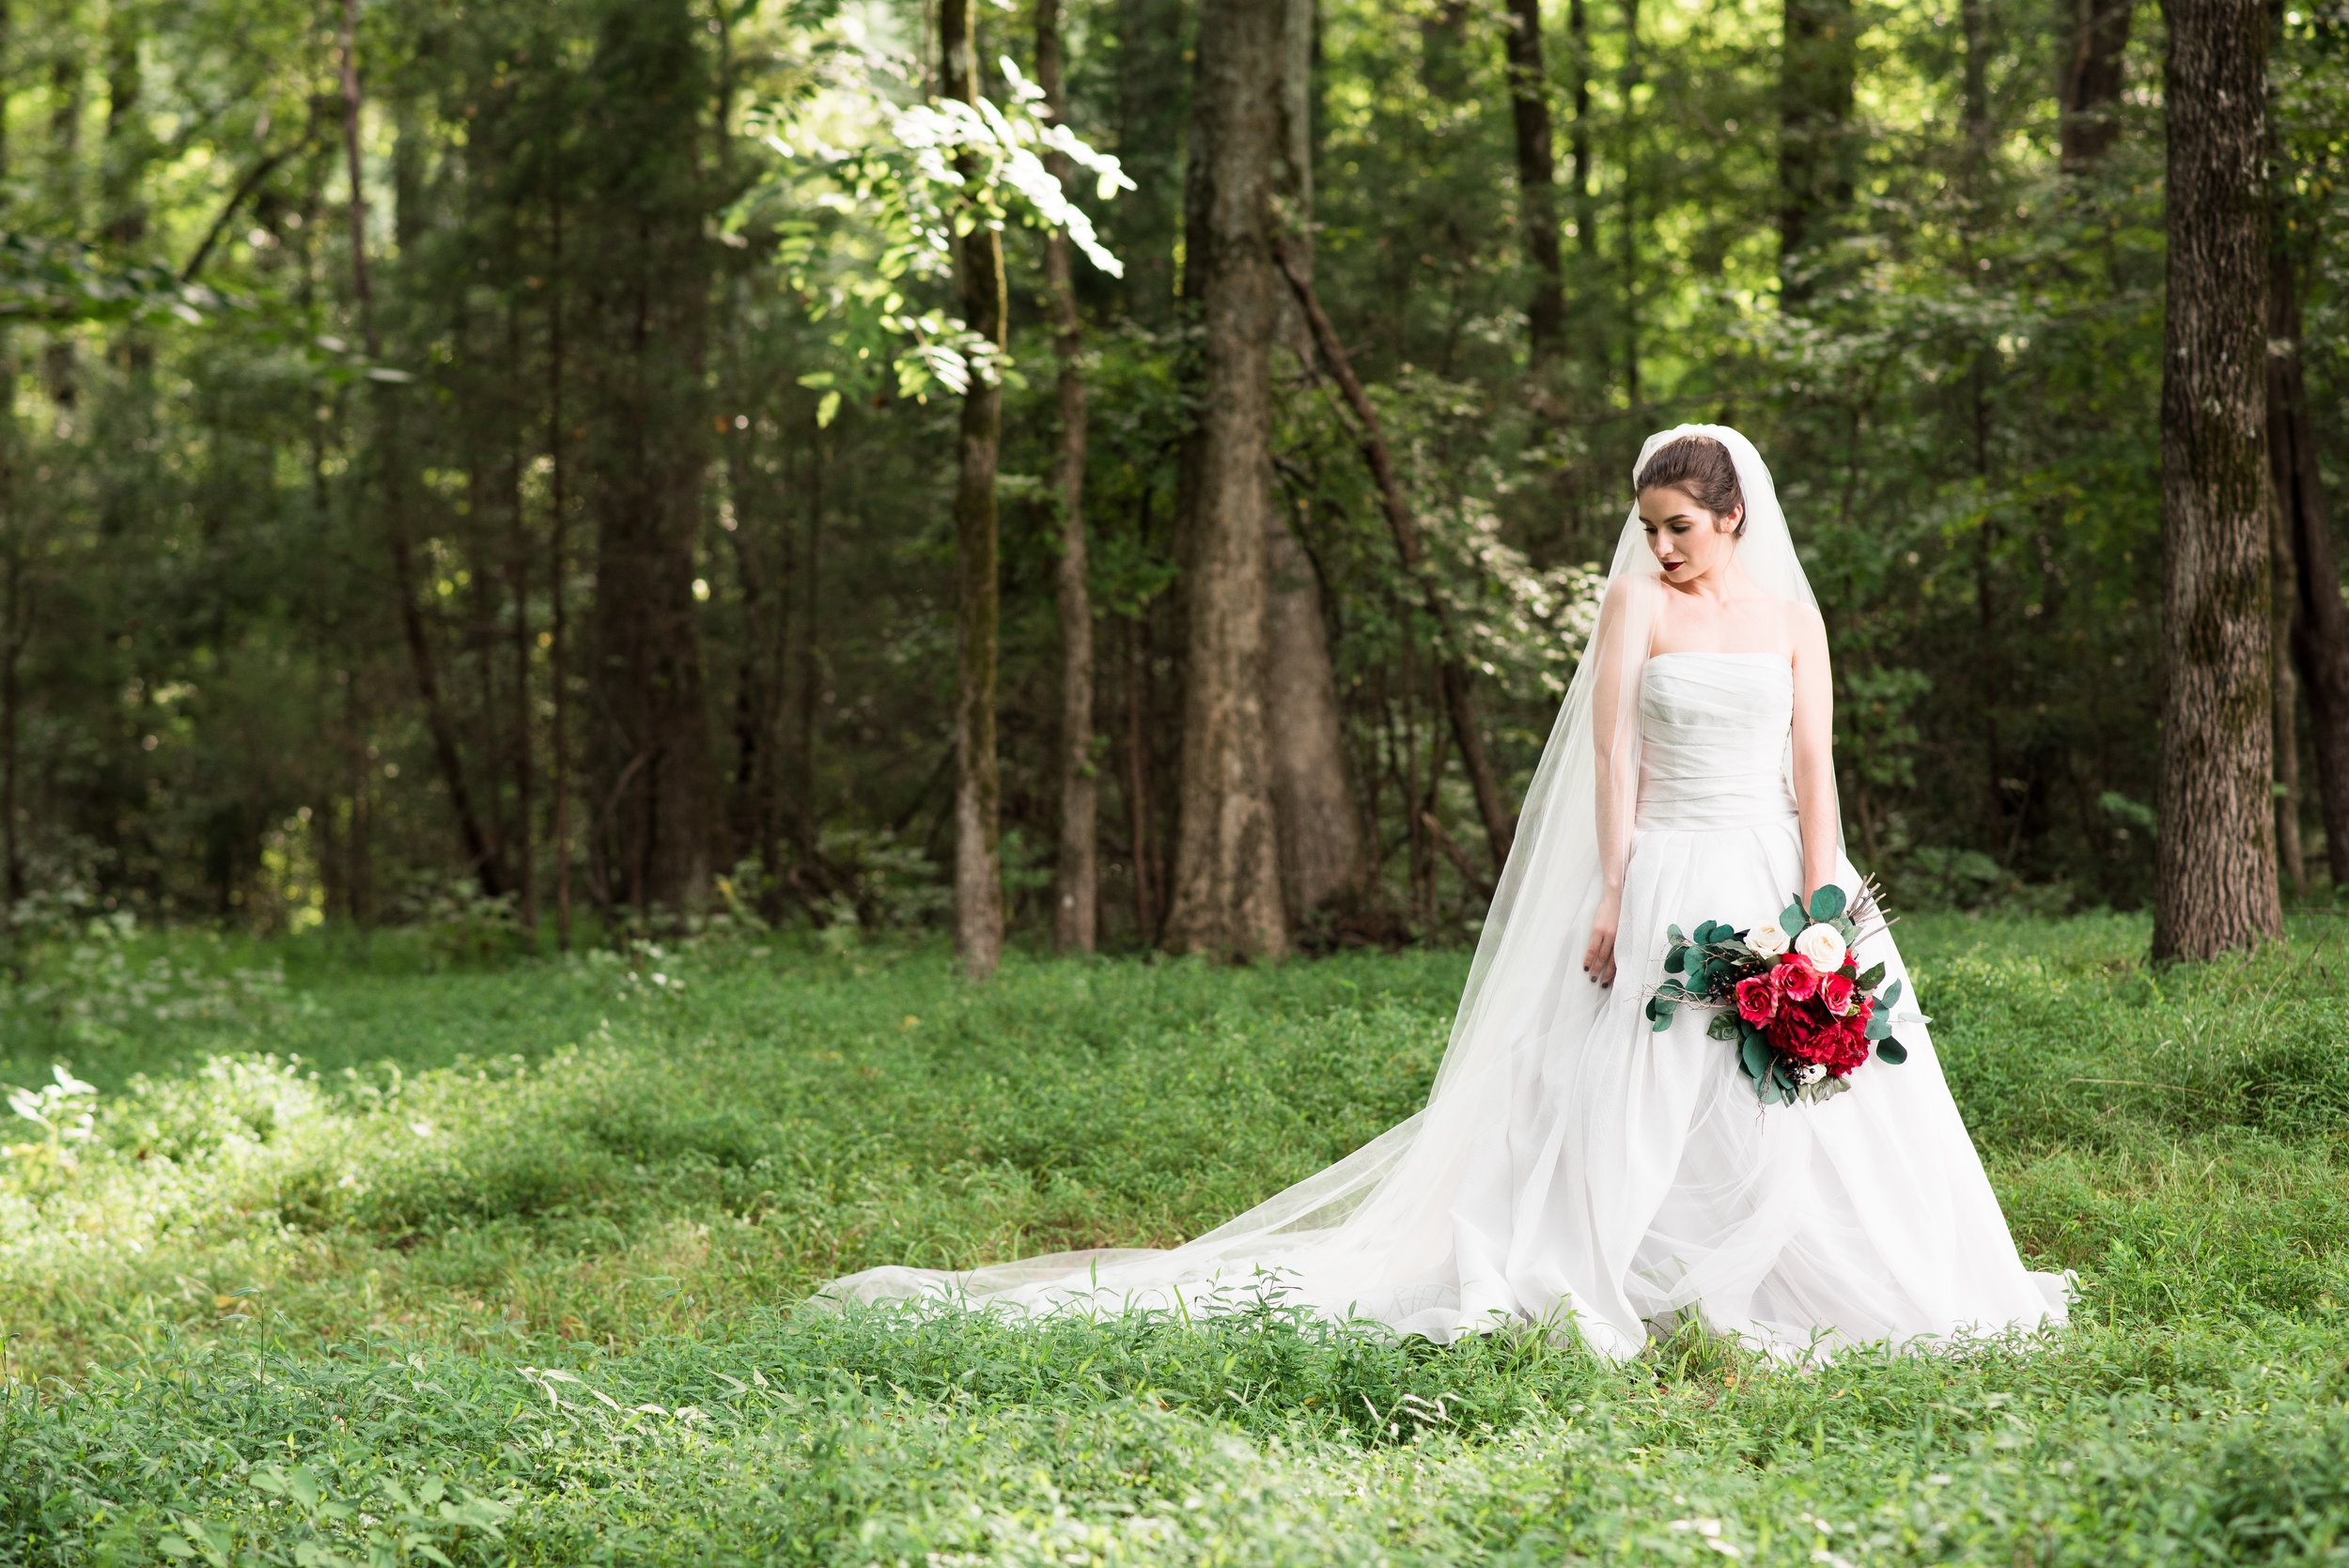 Bridal Portrait in the Woods | Westminster Park